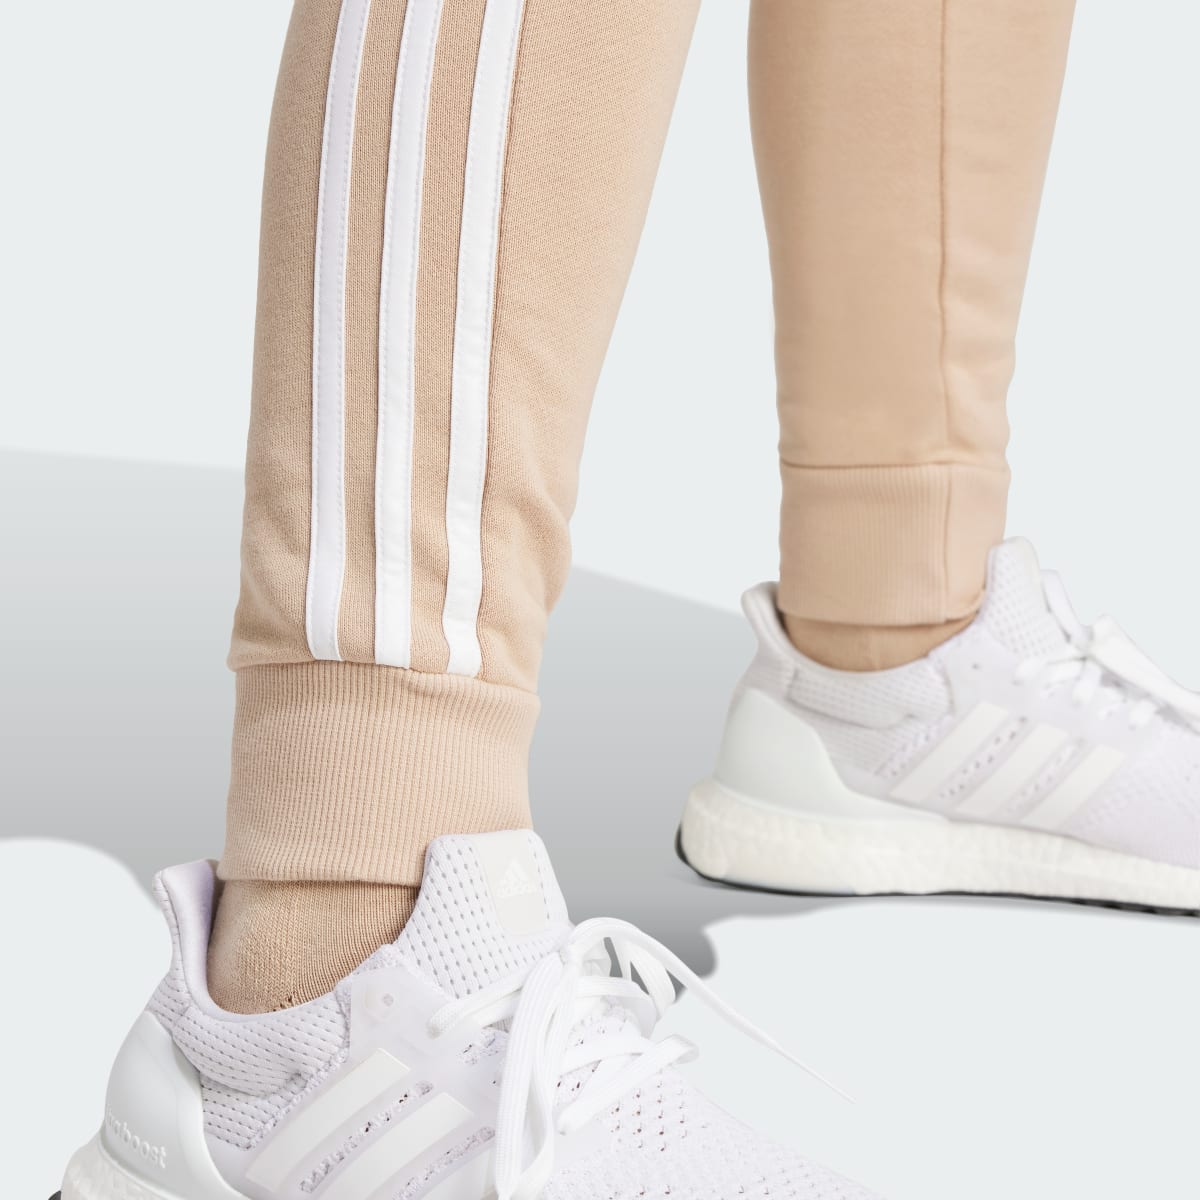 Adidas Essentials 3-Stripes French Terry Cuffed Pants. 6